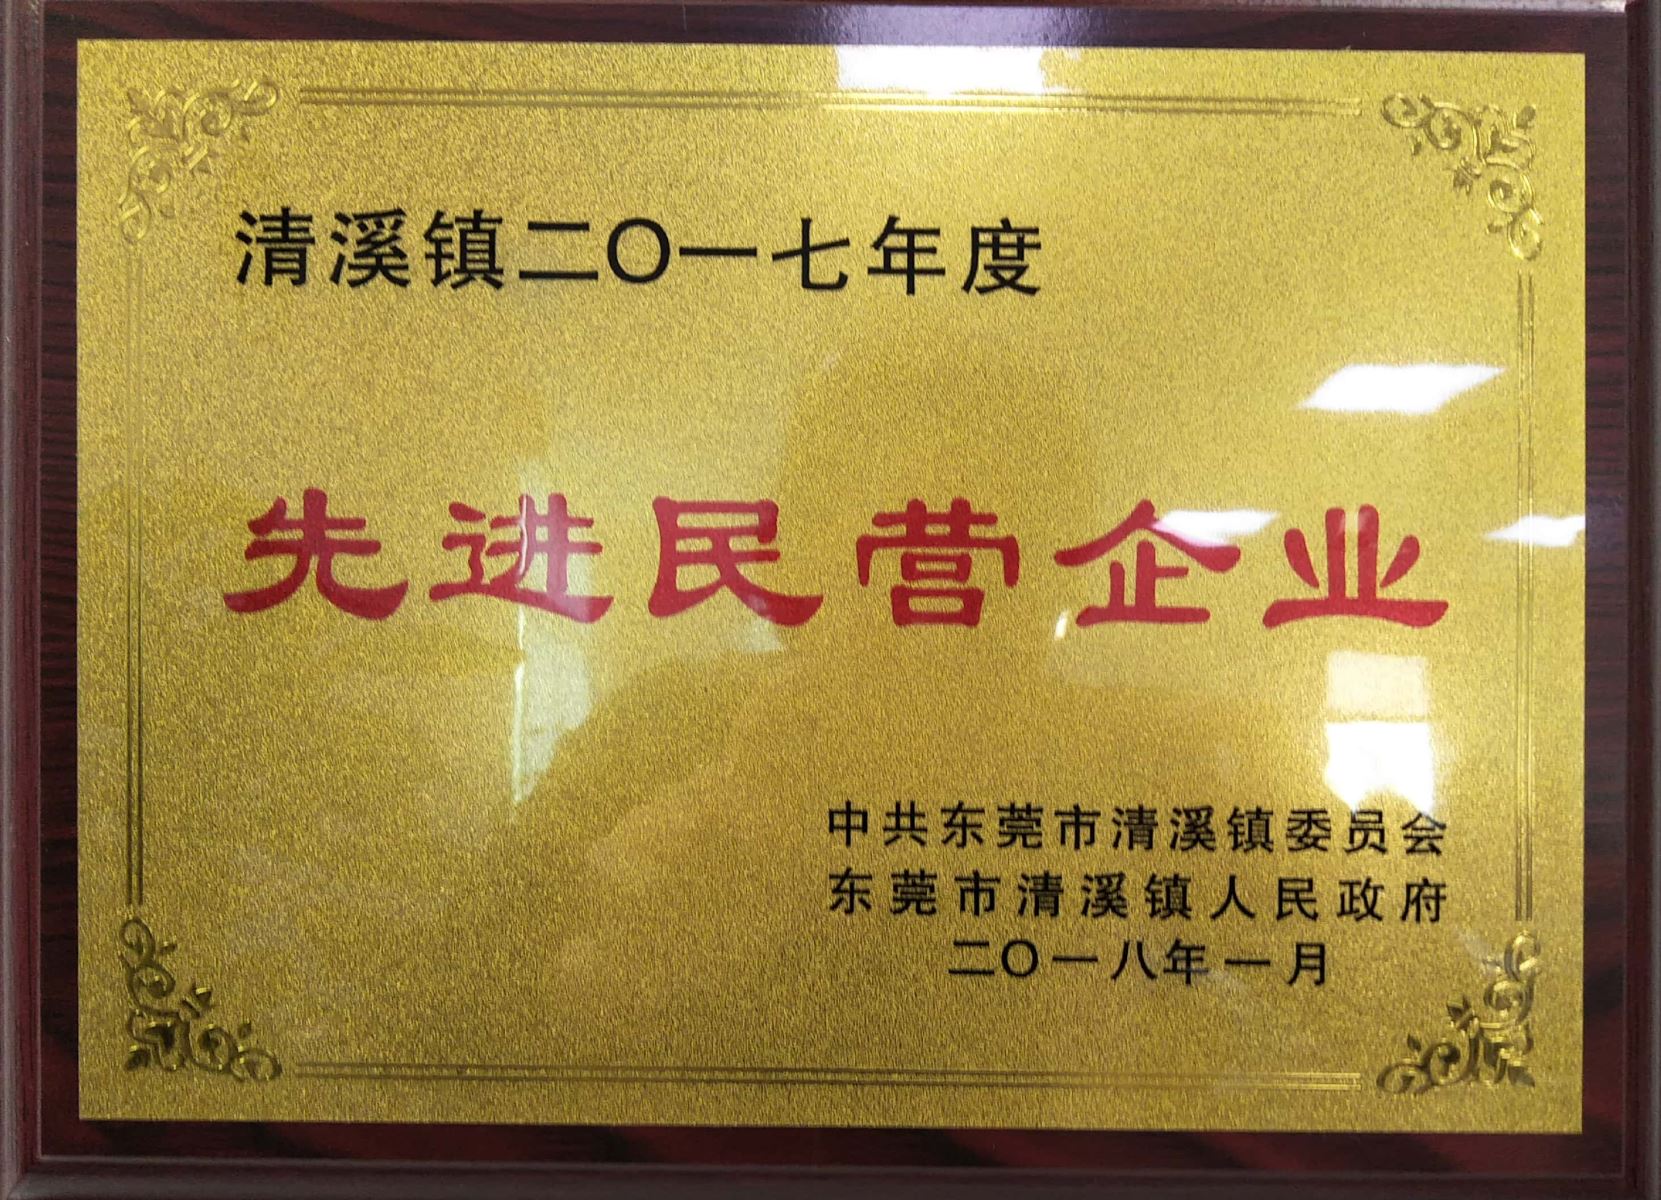 Deruiyuan is recognized as Advanced Private Enterprise for three straight years.